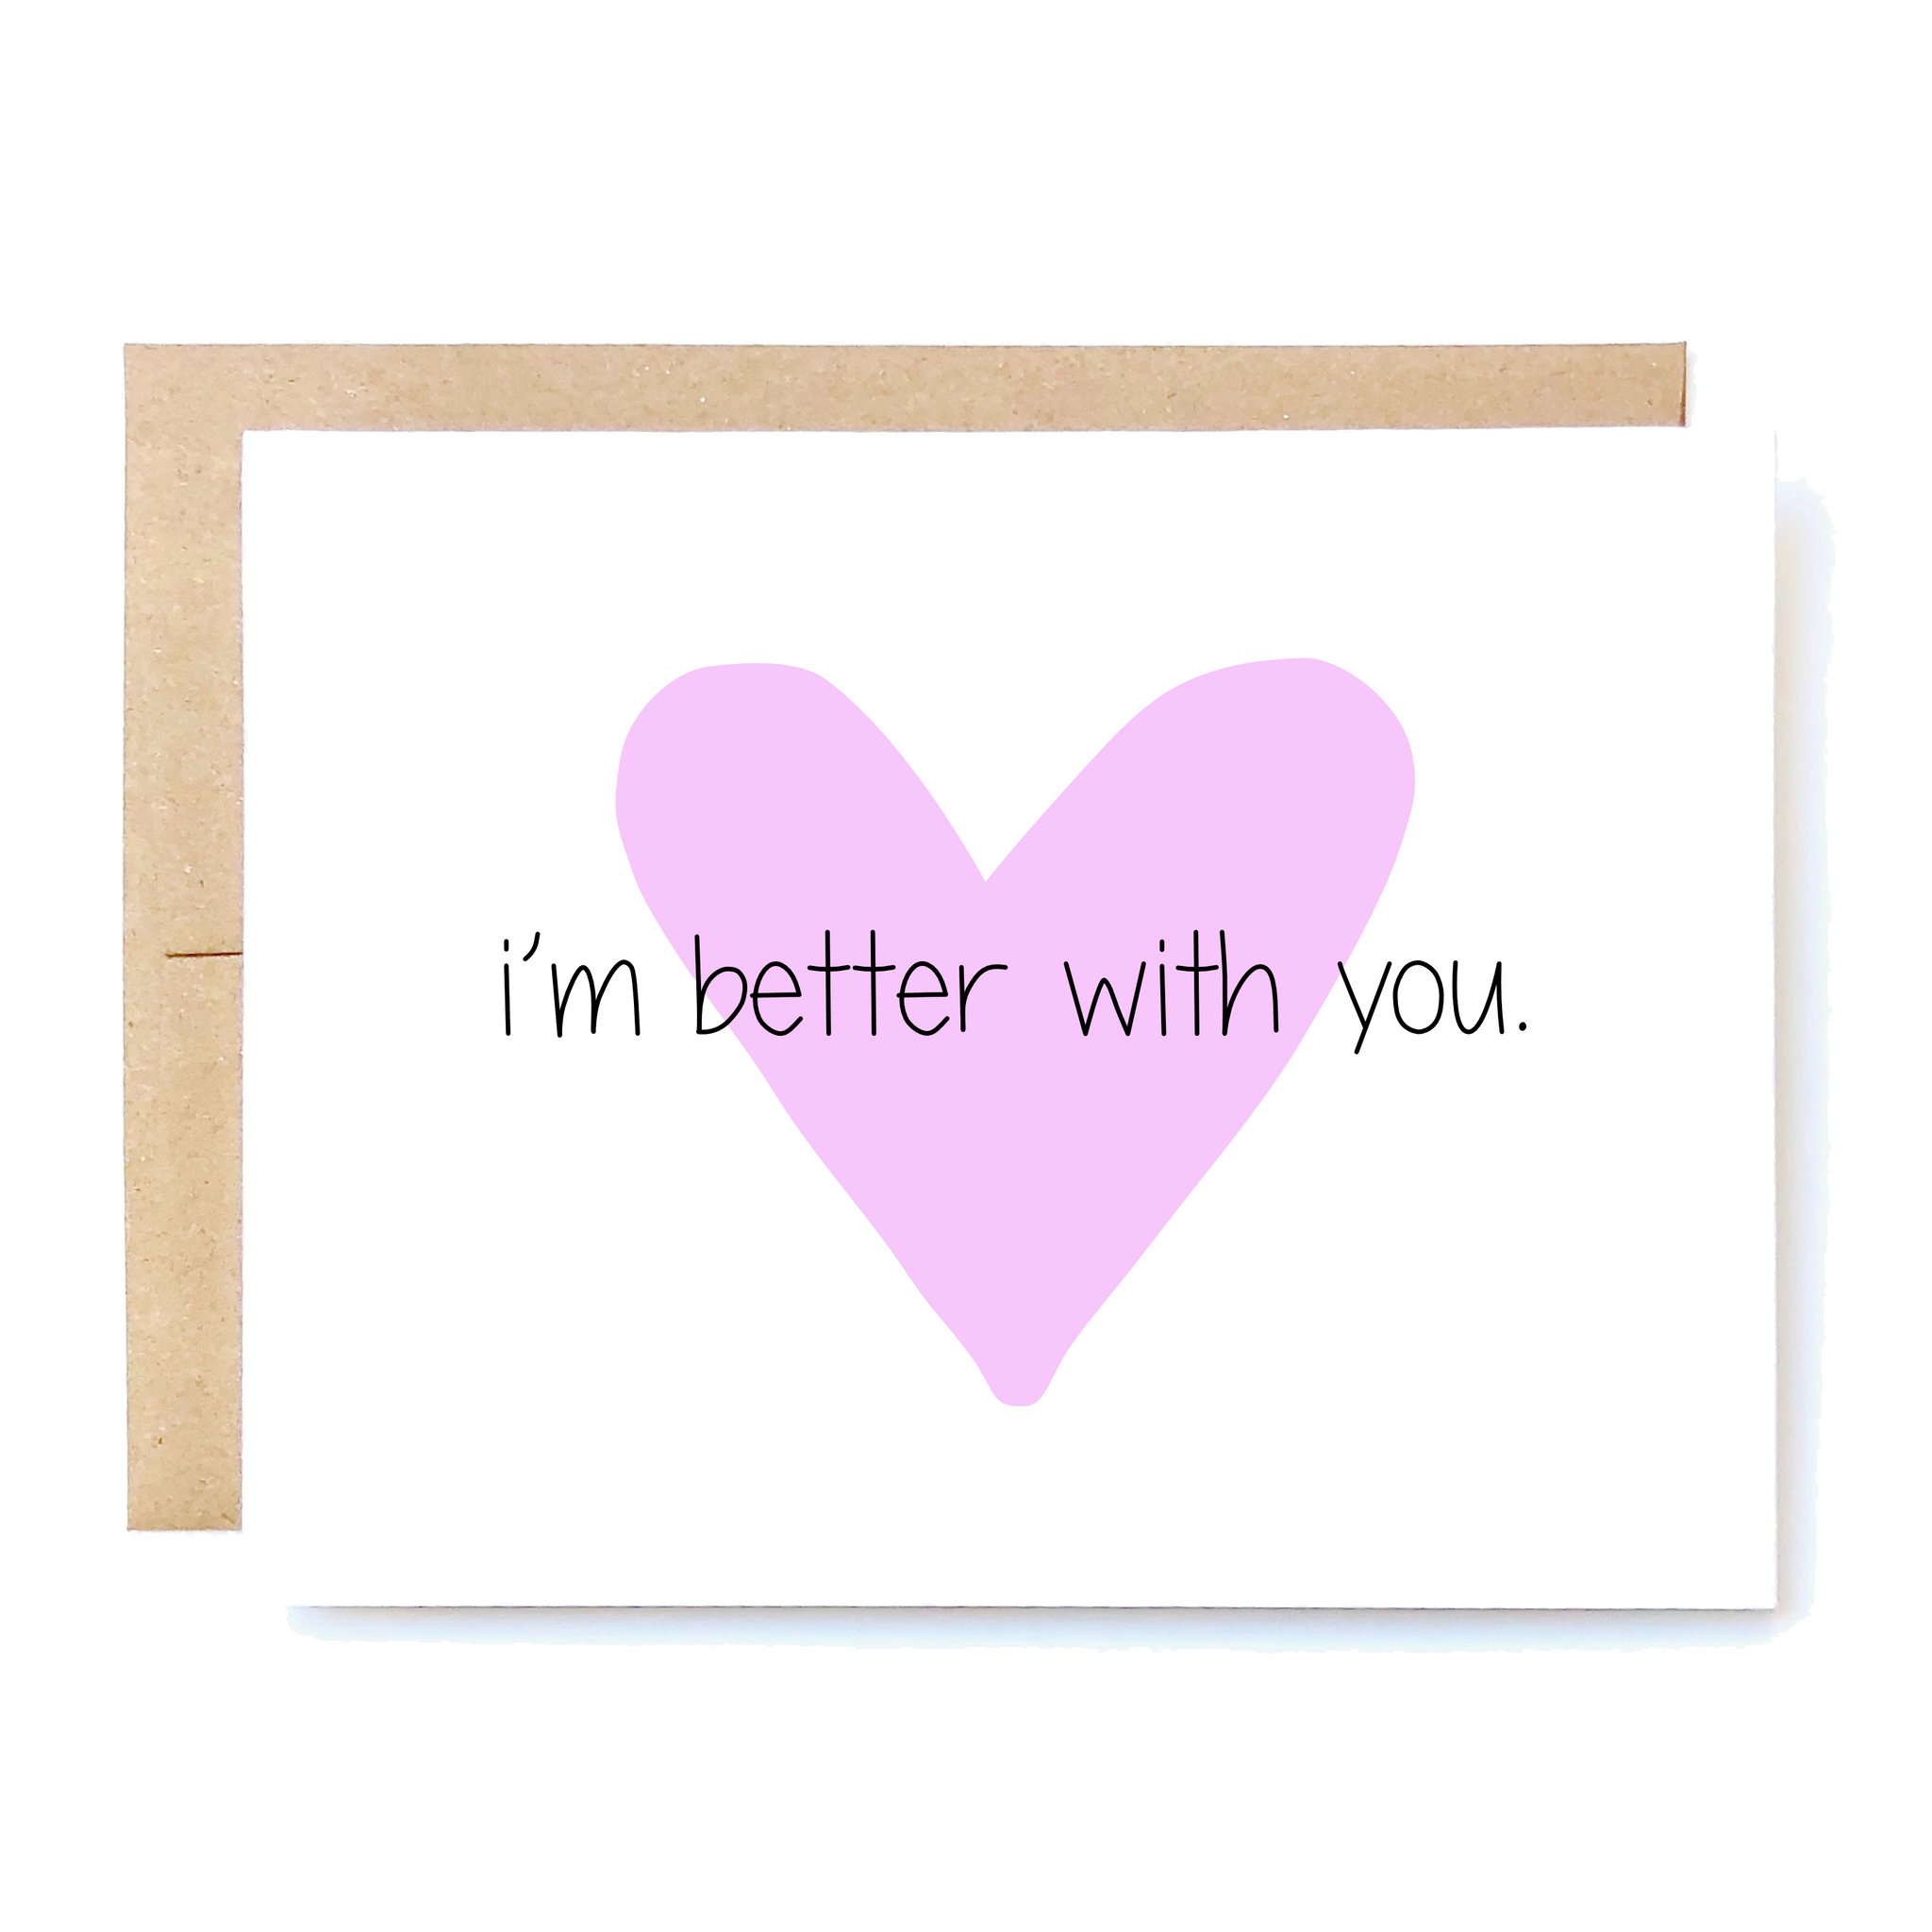 Card Front: I'm better with you.